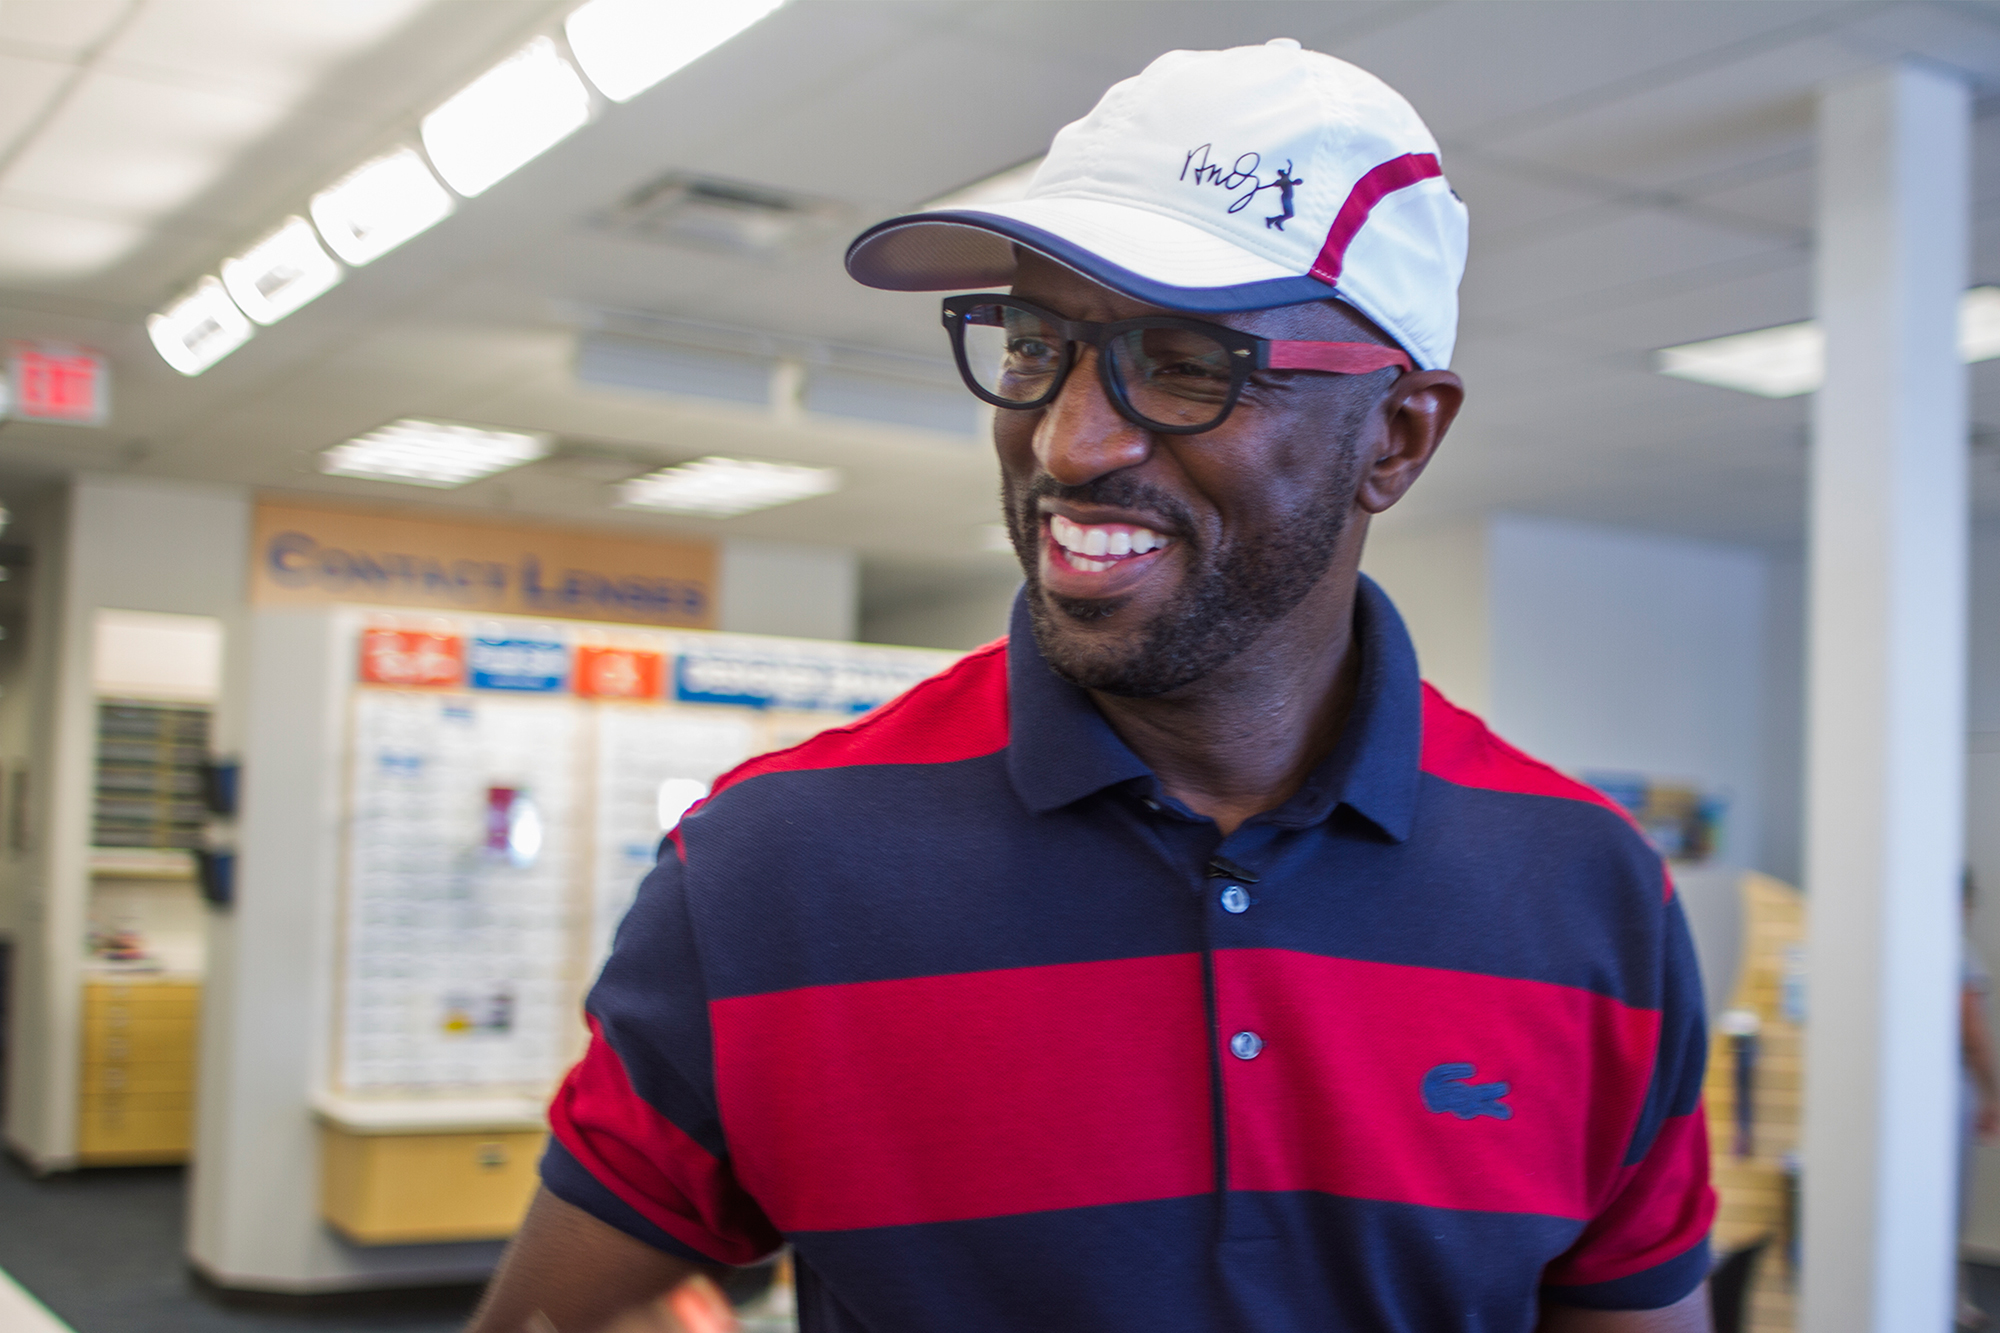 How long does it take to get glasses americas best America S Best And Rickey Smiley Launch Stylish Affordable Frames To Encourage More Eye Exams